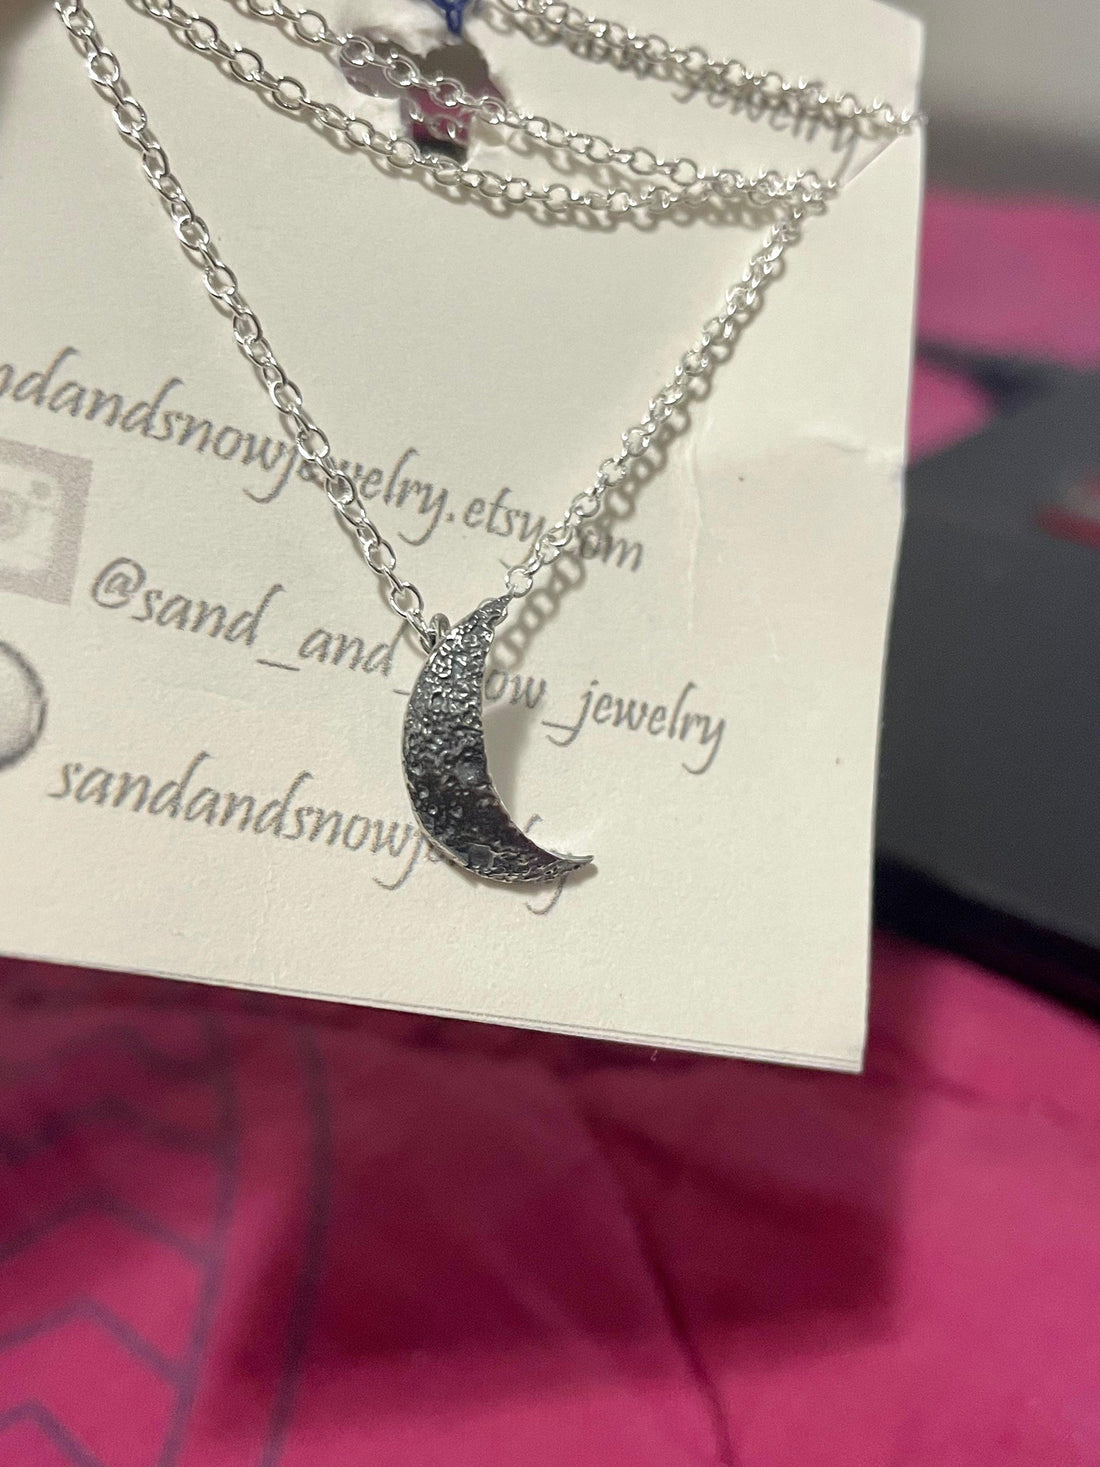 Baby Moon Sterling Silver Necklace - Sand and Snow Jewelry - Necklaces - Ready to Ship